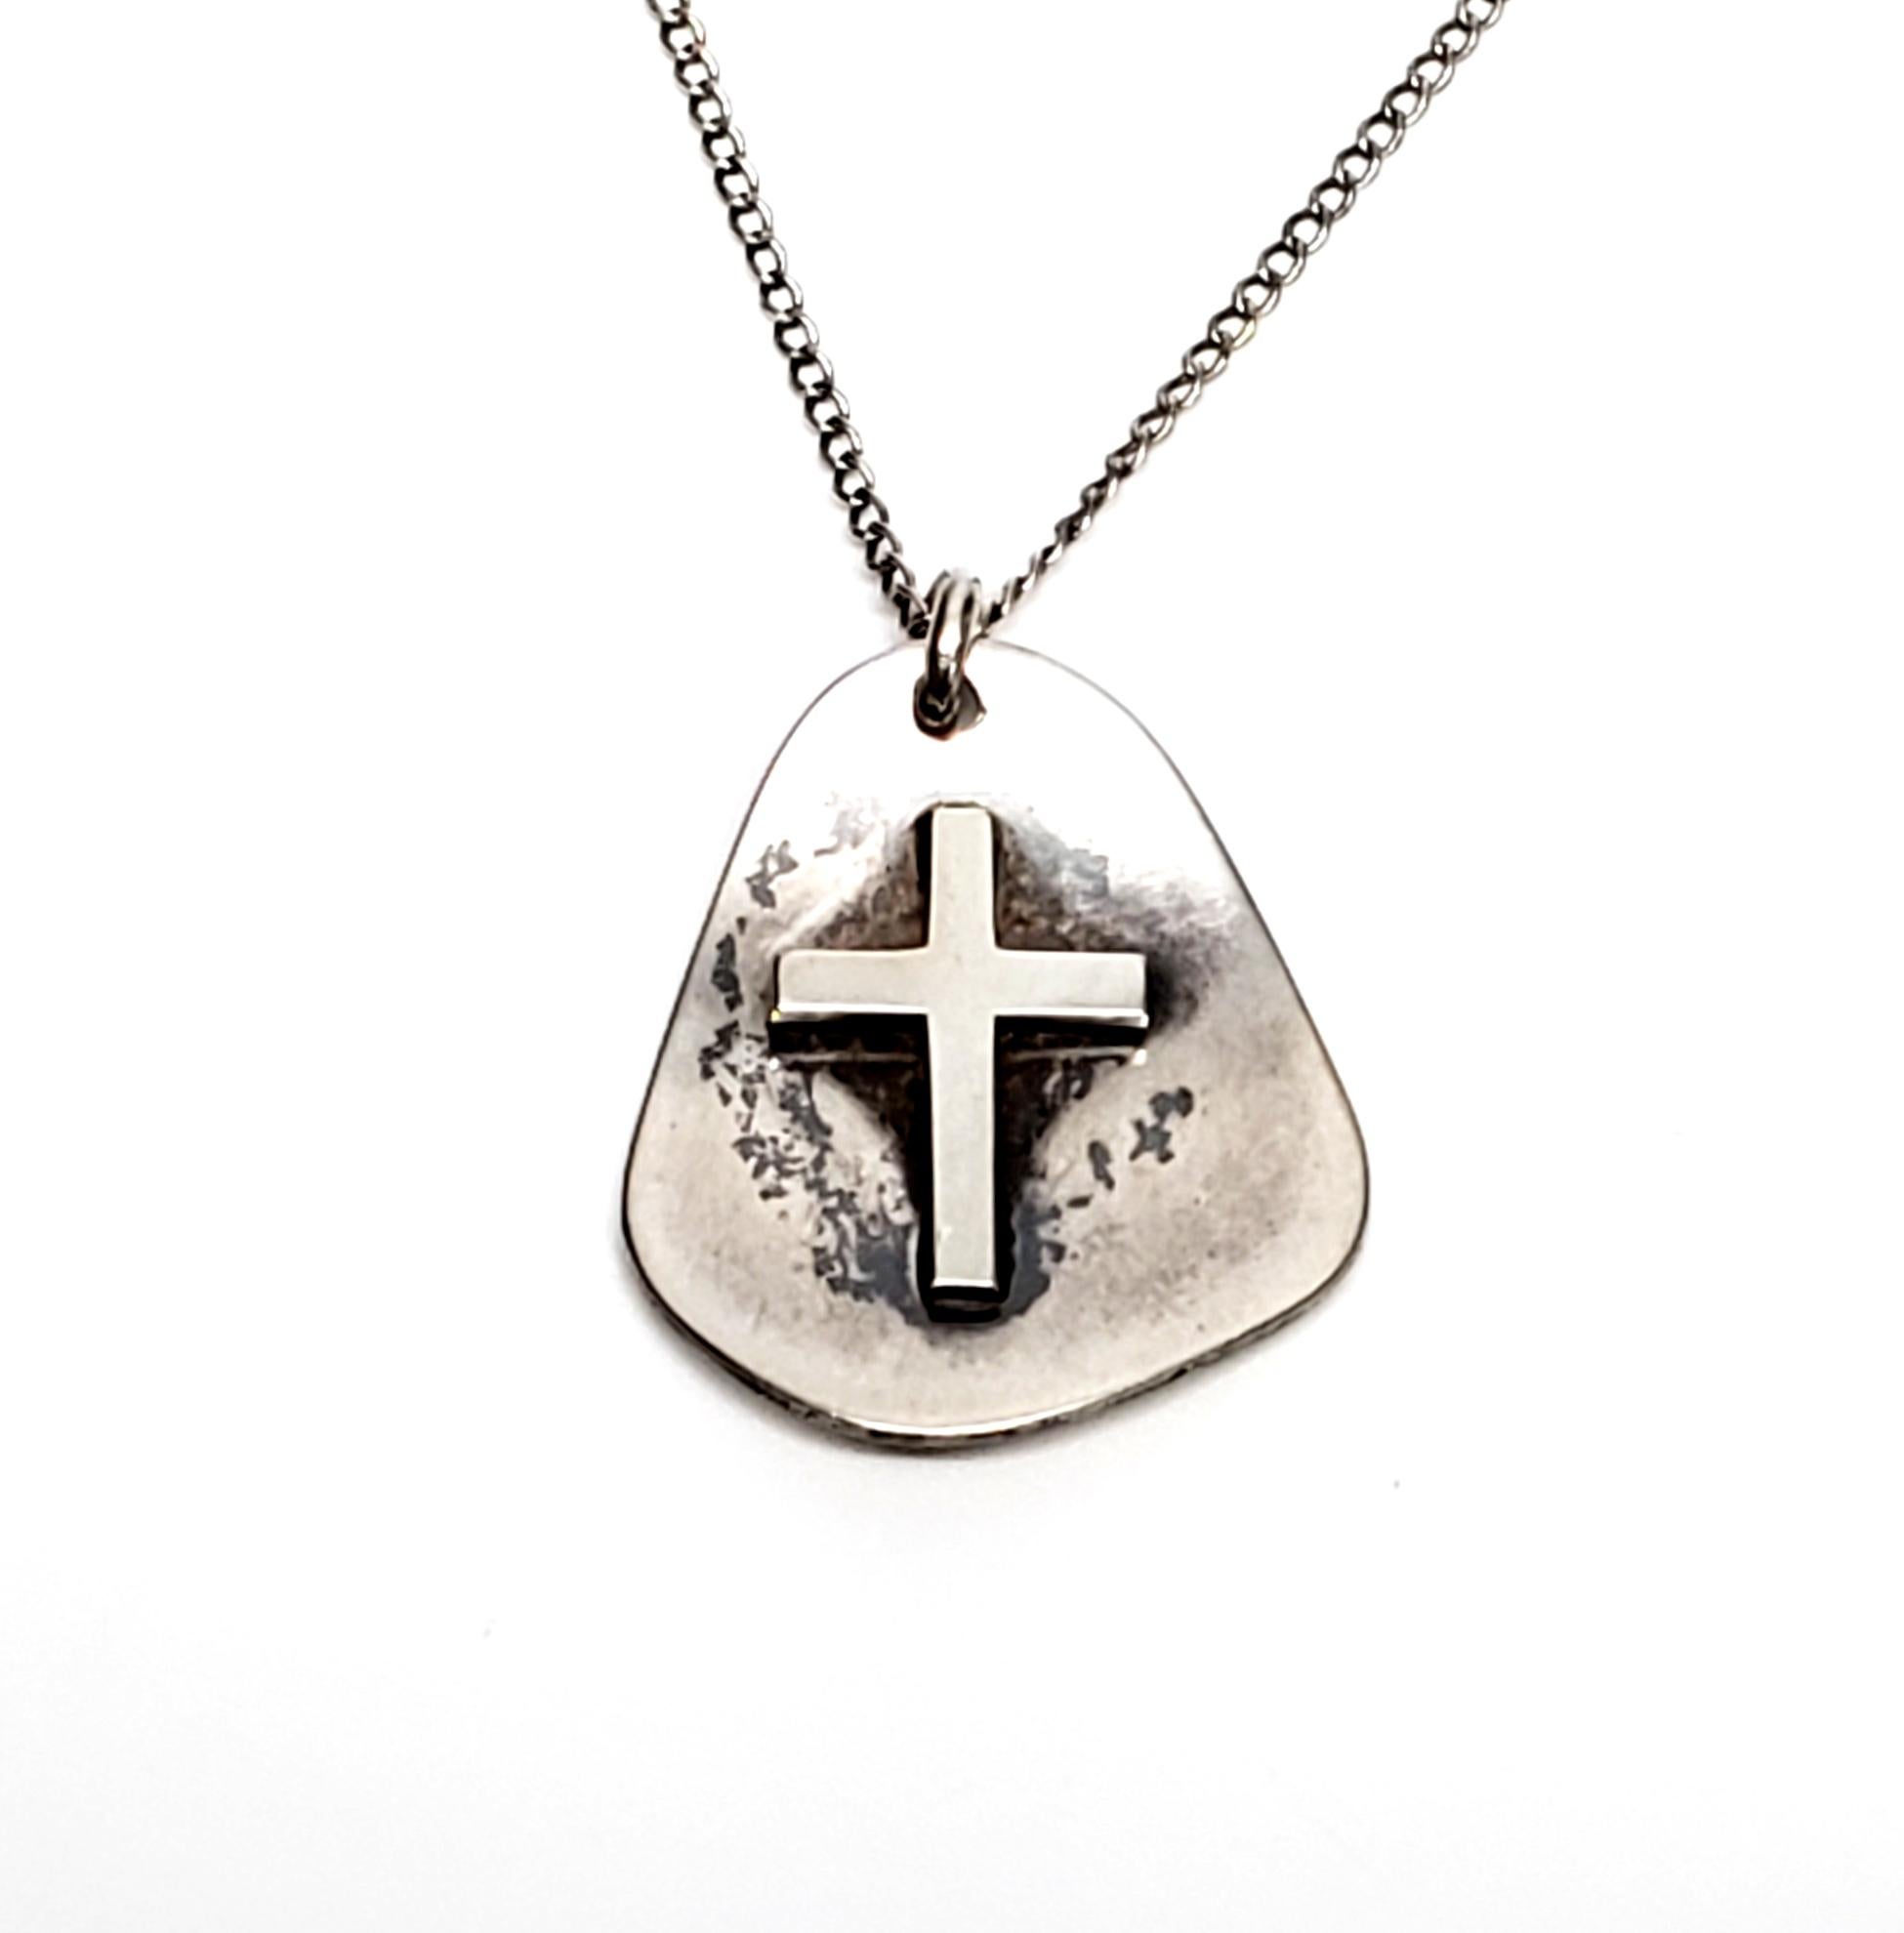 Vintage sterling silver cross pendant with a chain by Herman Roth.

Features an asymmetrical pendant with a cross on a thin chain.

Pendant measures 15/16